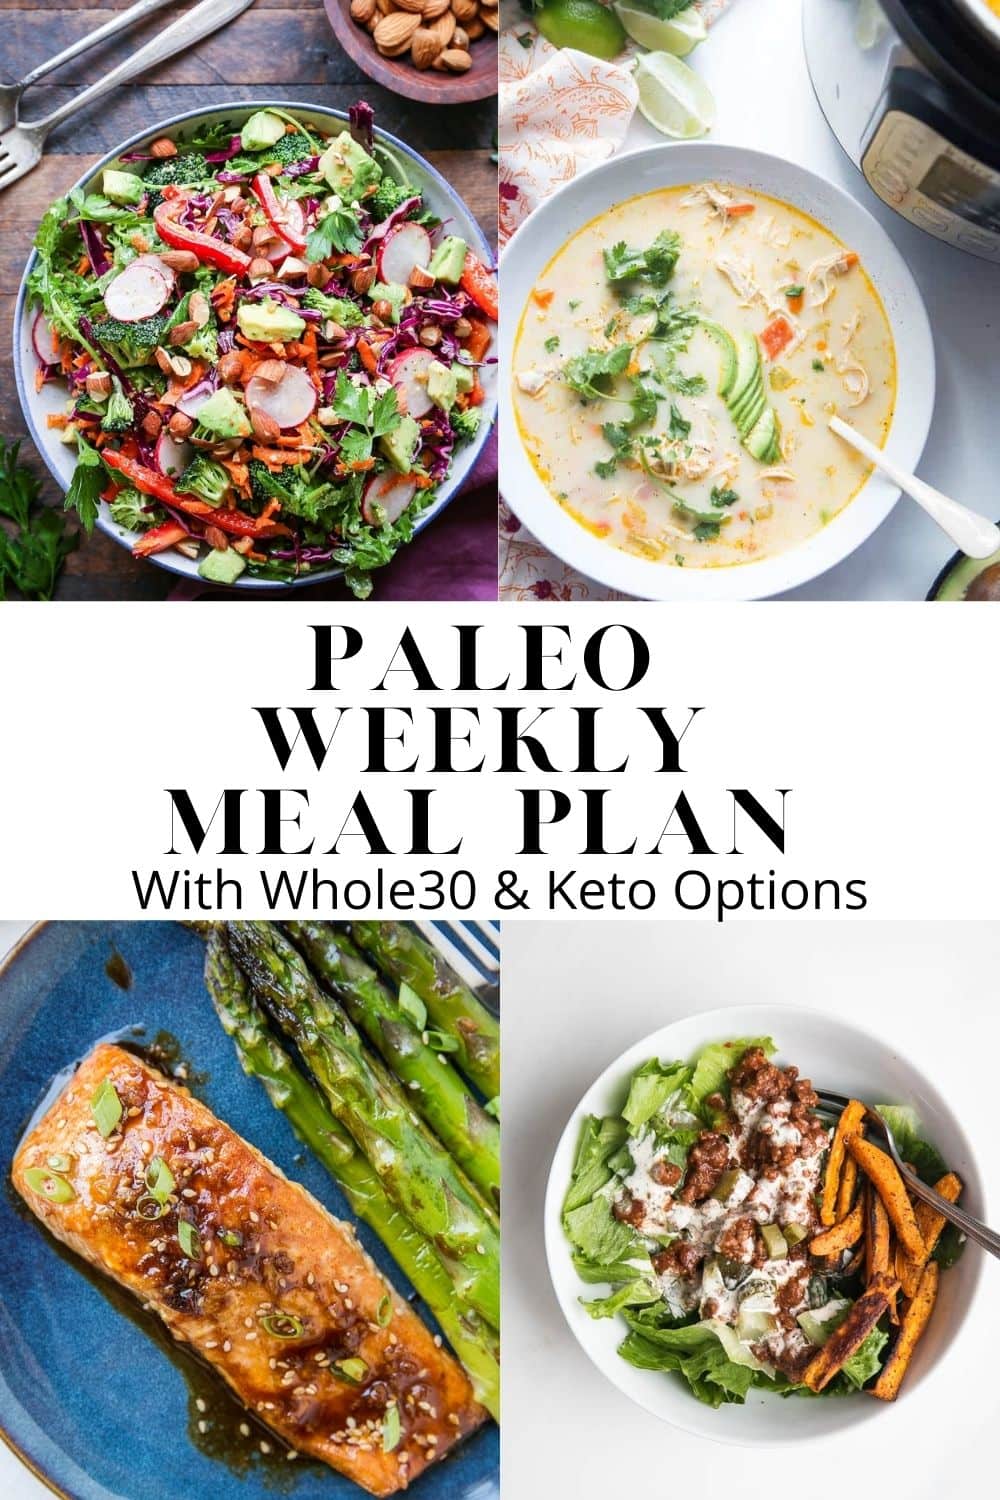 Healthy Paleo Meal Plan - Week 5 - an anti-inflammatory meal plan with six dinner recipes and one dessert